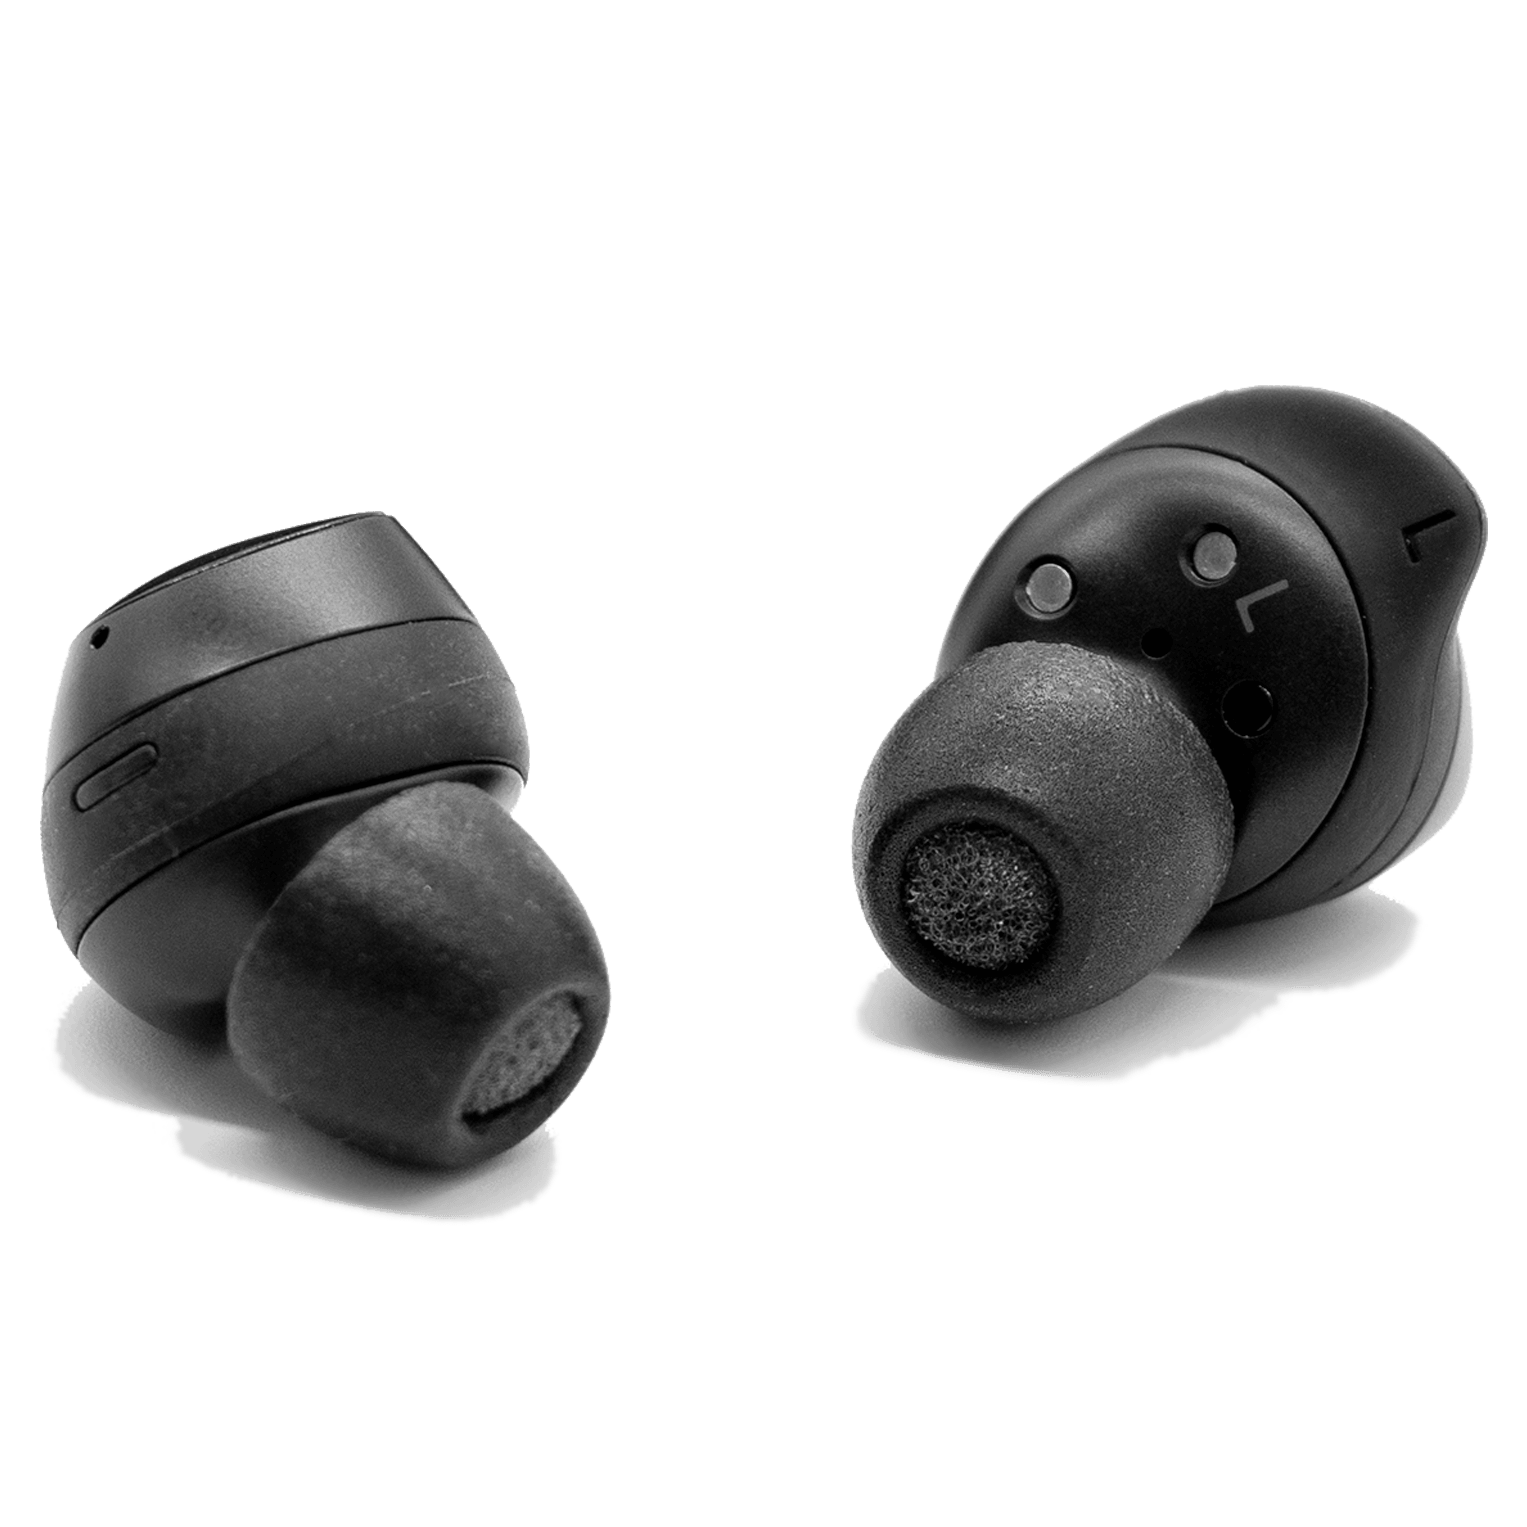 Silicone Cases For Samsung Galaxy Buds2 Pro, Buds Pro, Buds 2 – Comply Foam